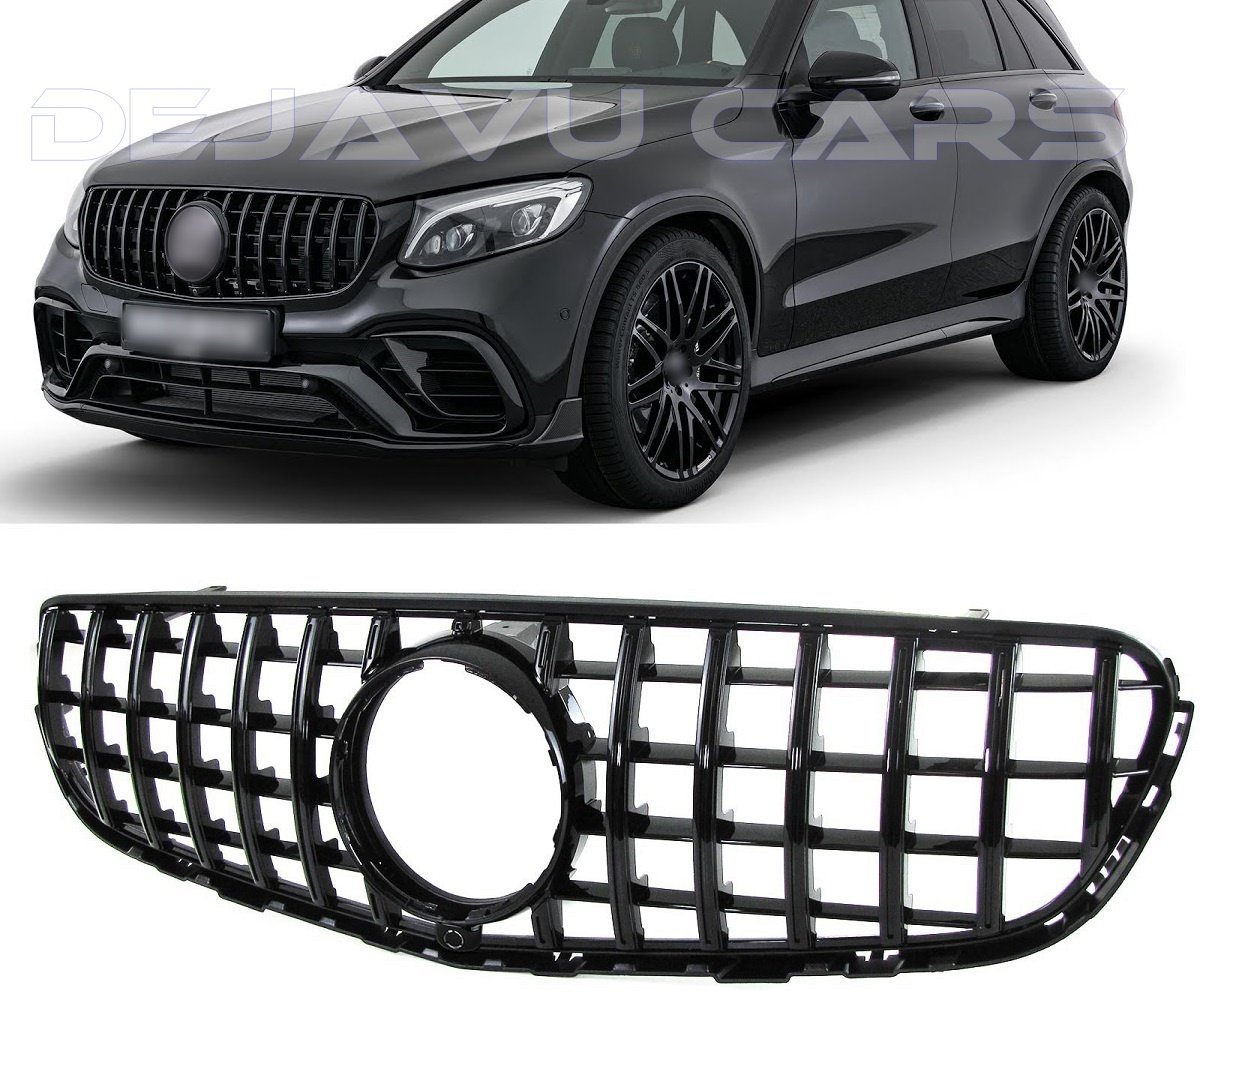 Grille Sport Chrome and Black for Mercedes X253 GLC-CLASS AMG LOOK